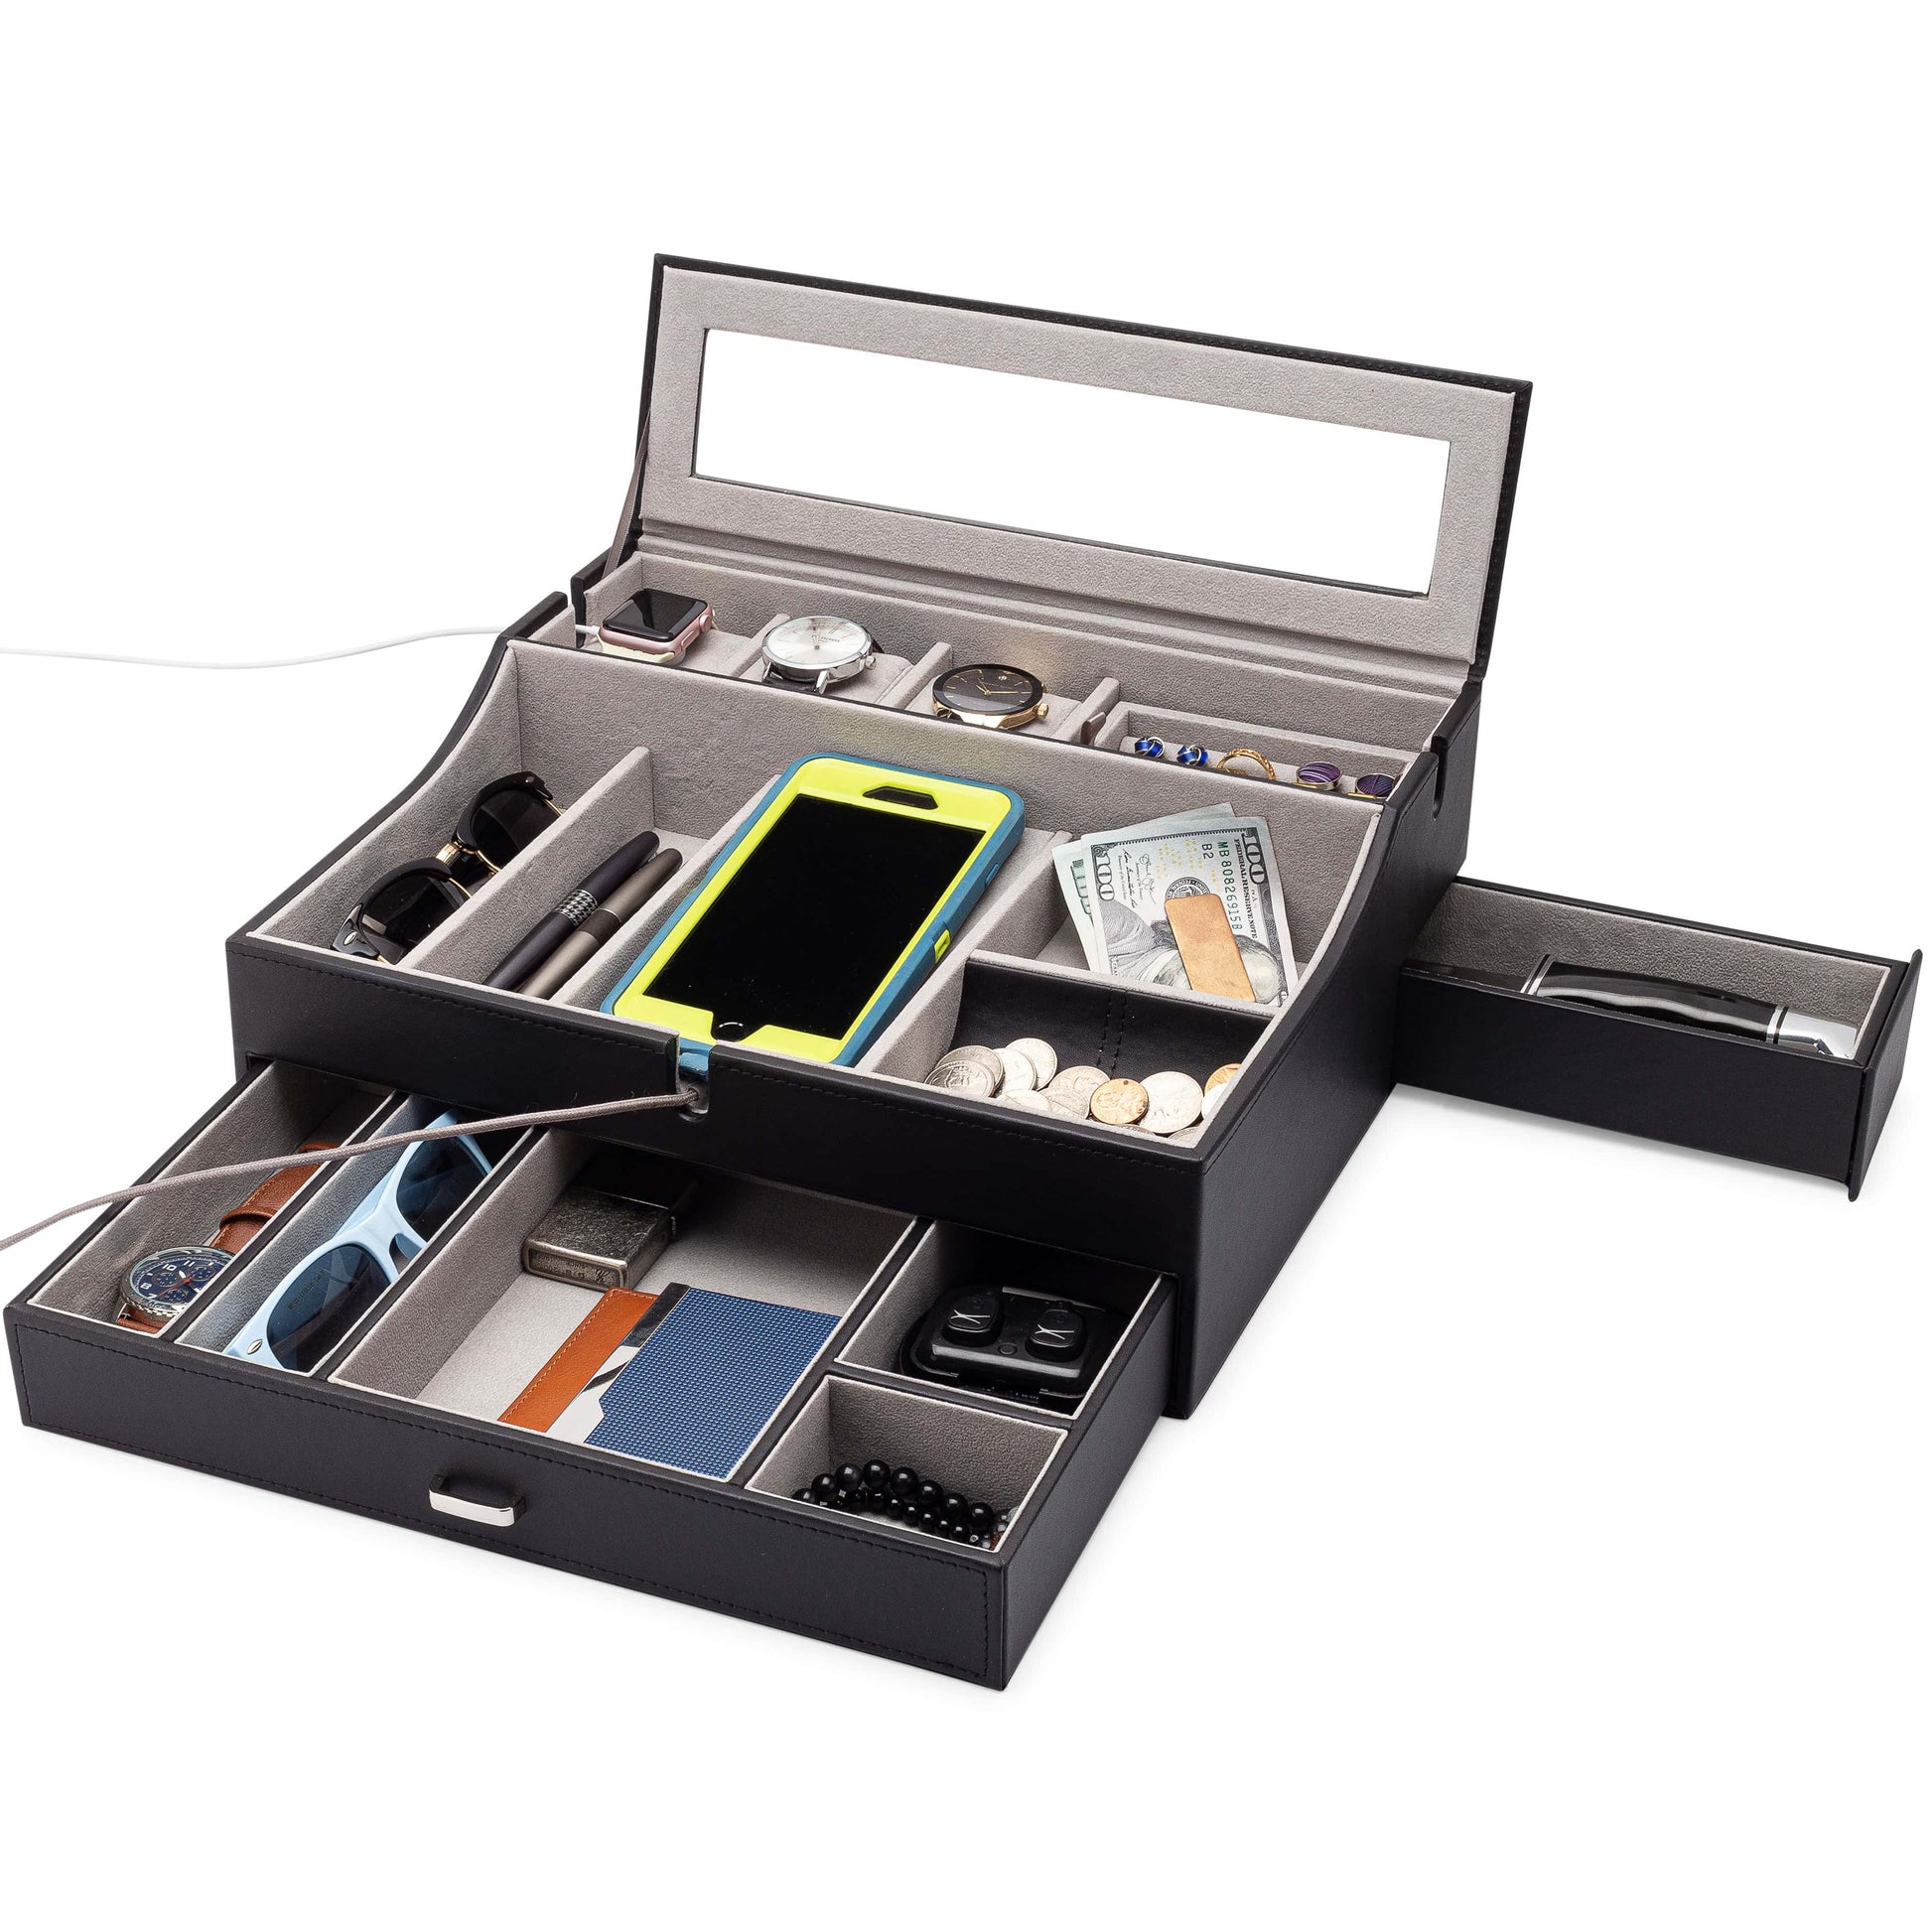 HOUNDSBAY Black & Grey Quartermaster Watch Box Display and Valet Combo with Drawers and Secret Side Drawer